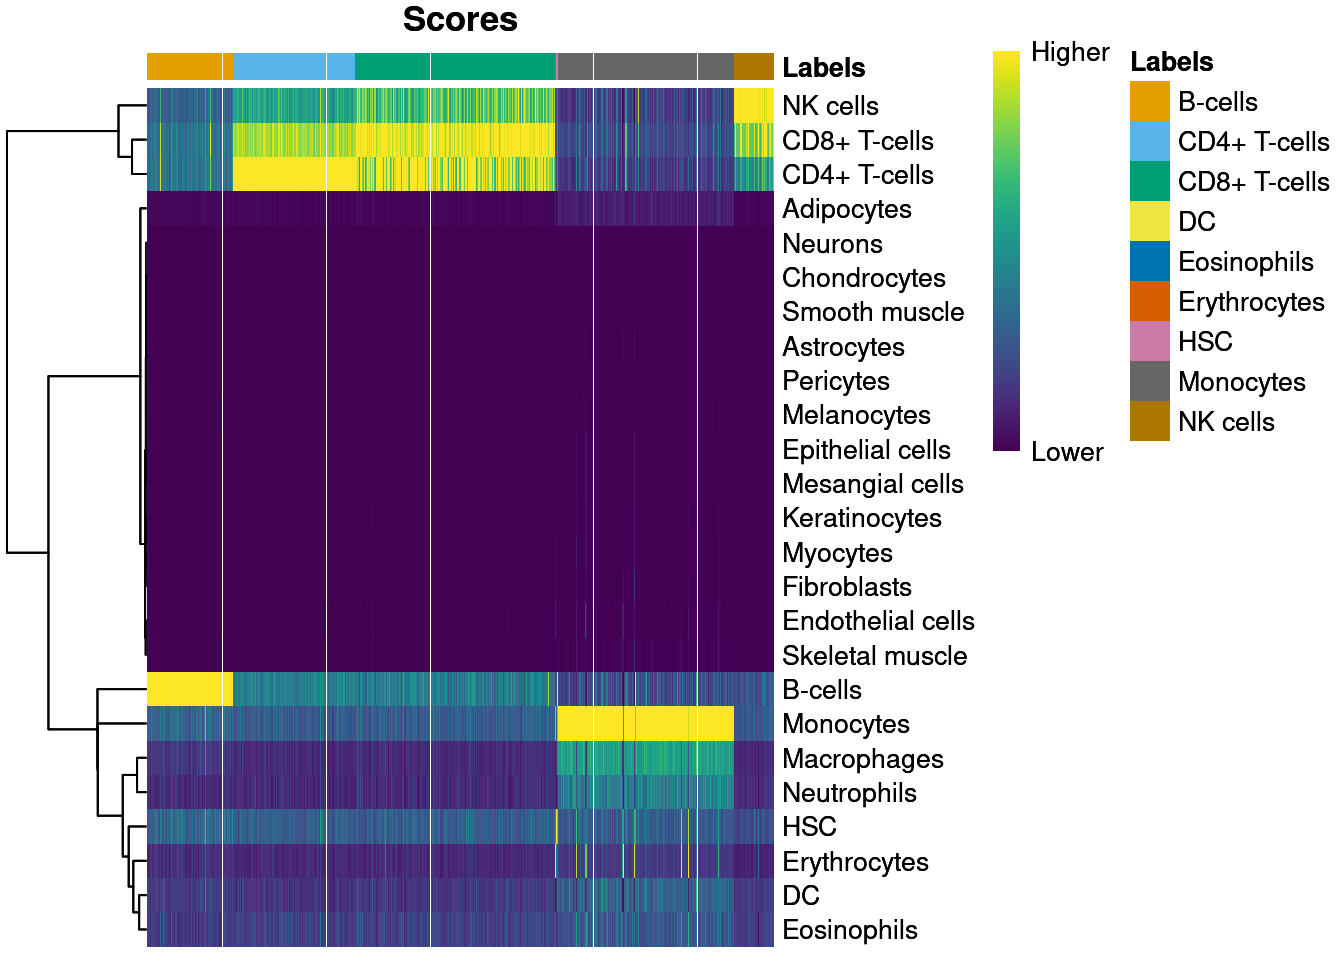 Heatmap of the assignment score for each cell (column) and label (row). Scores are shown before any fine-tuning and are normalized to [0, 1] within each cell.